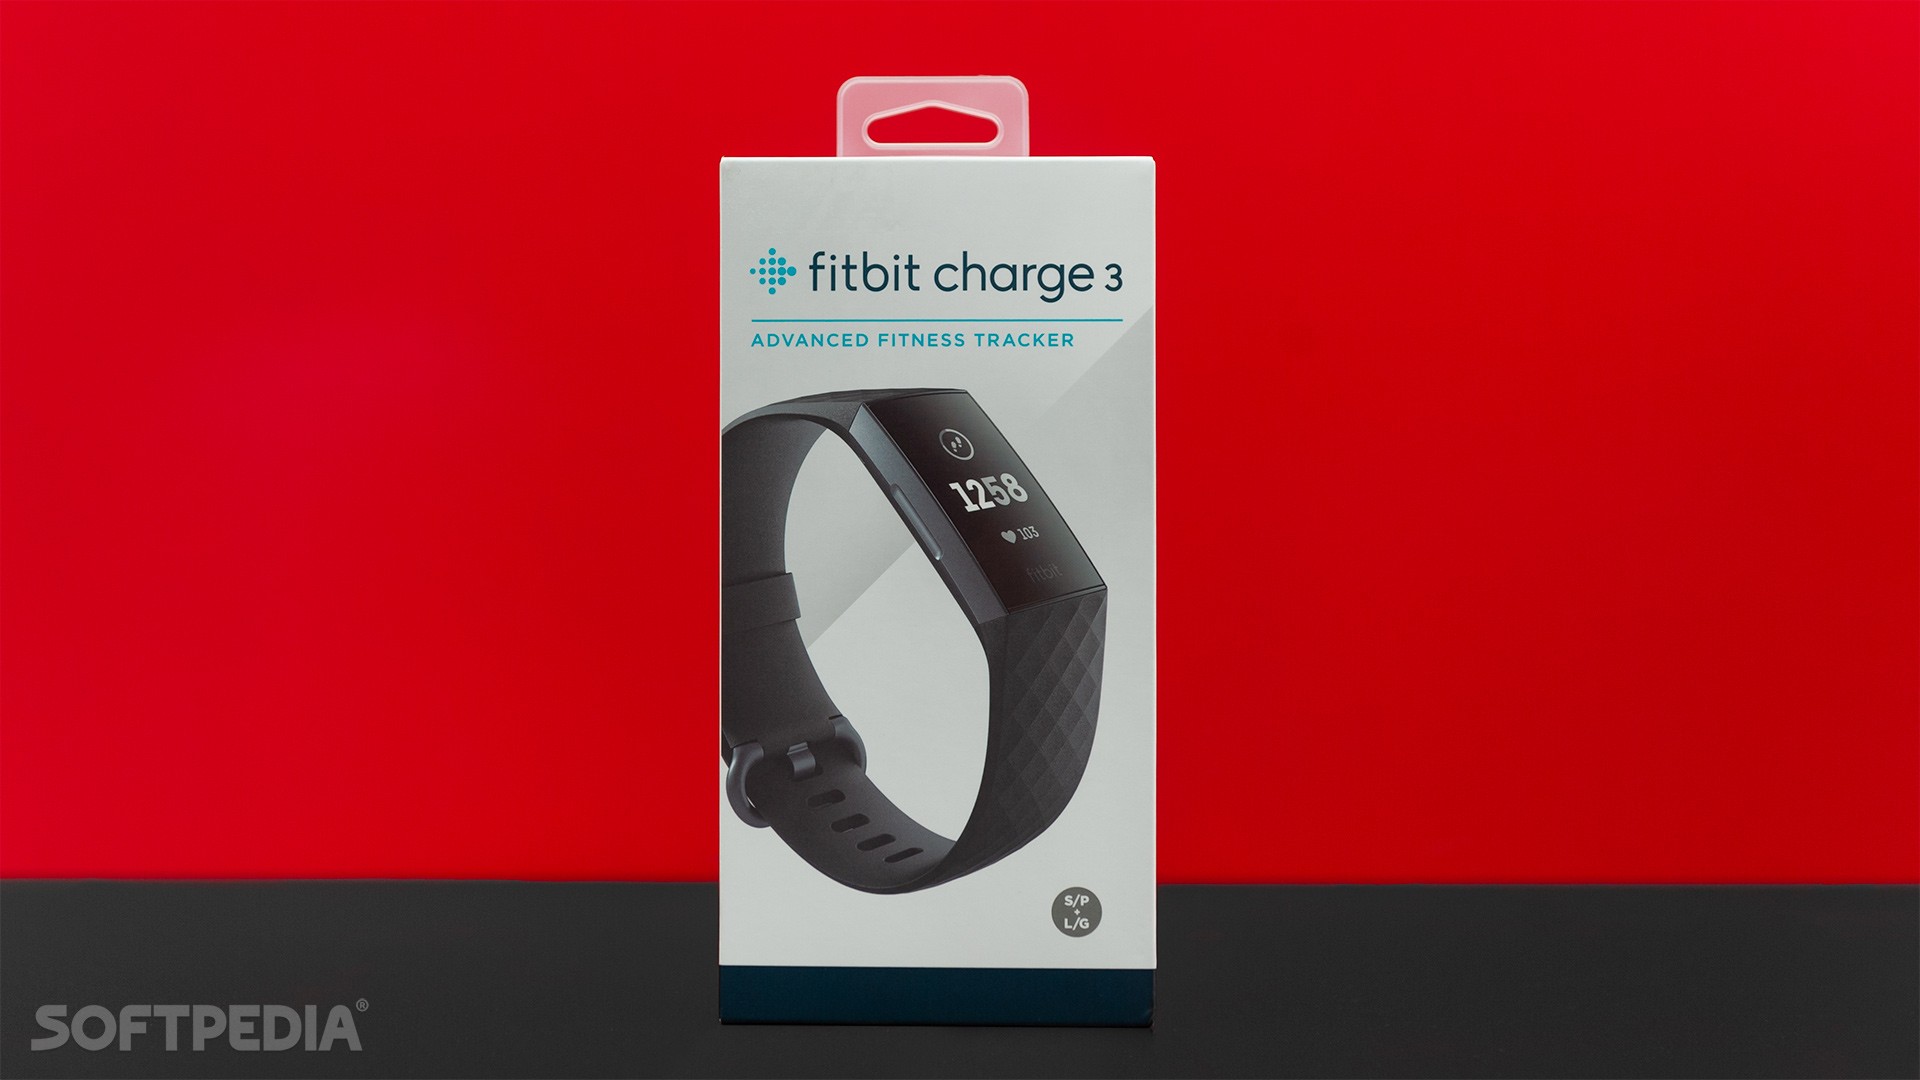 fitbit brightness charge 3